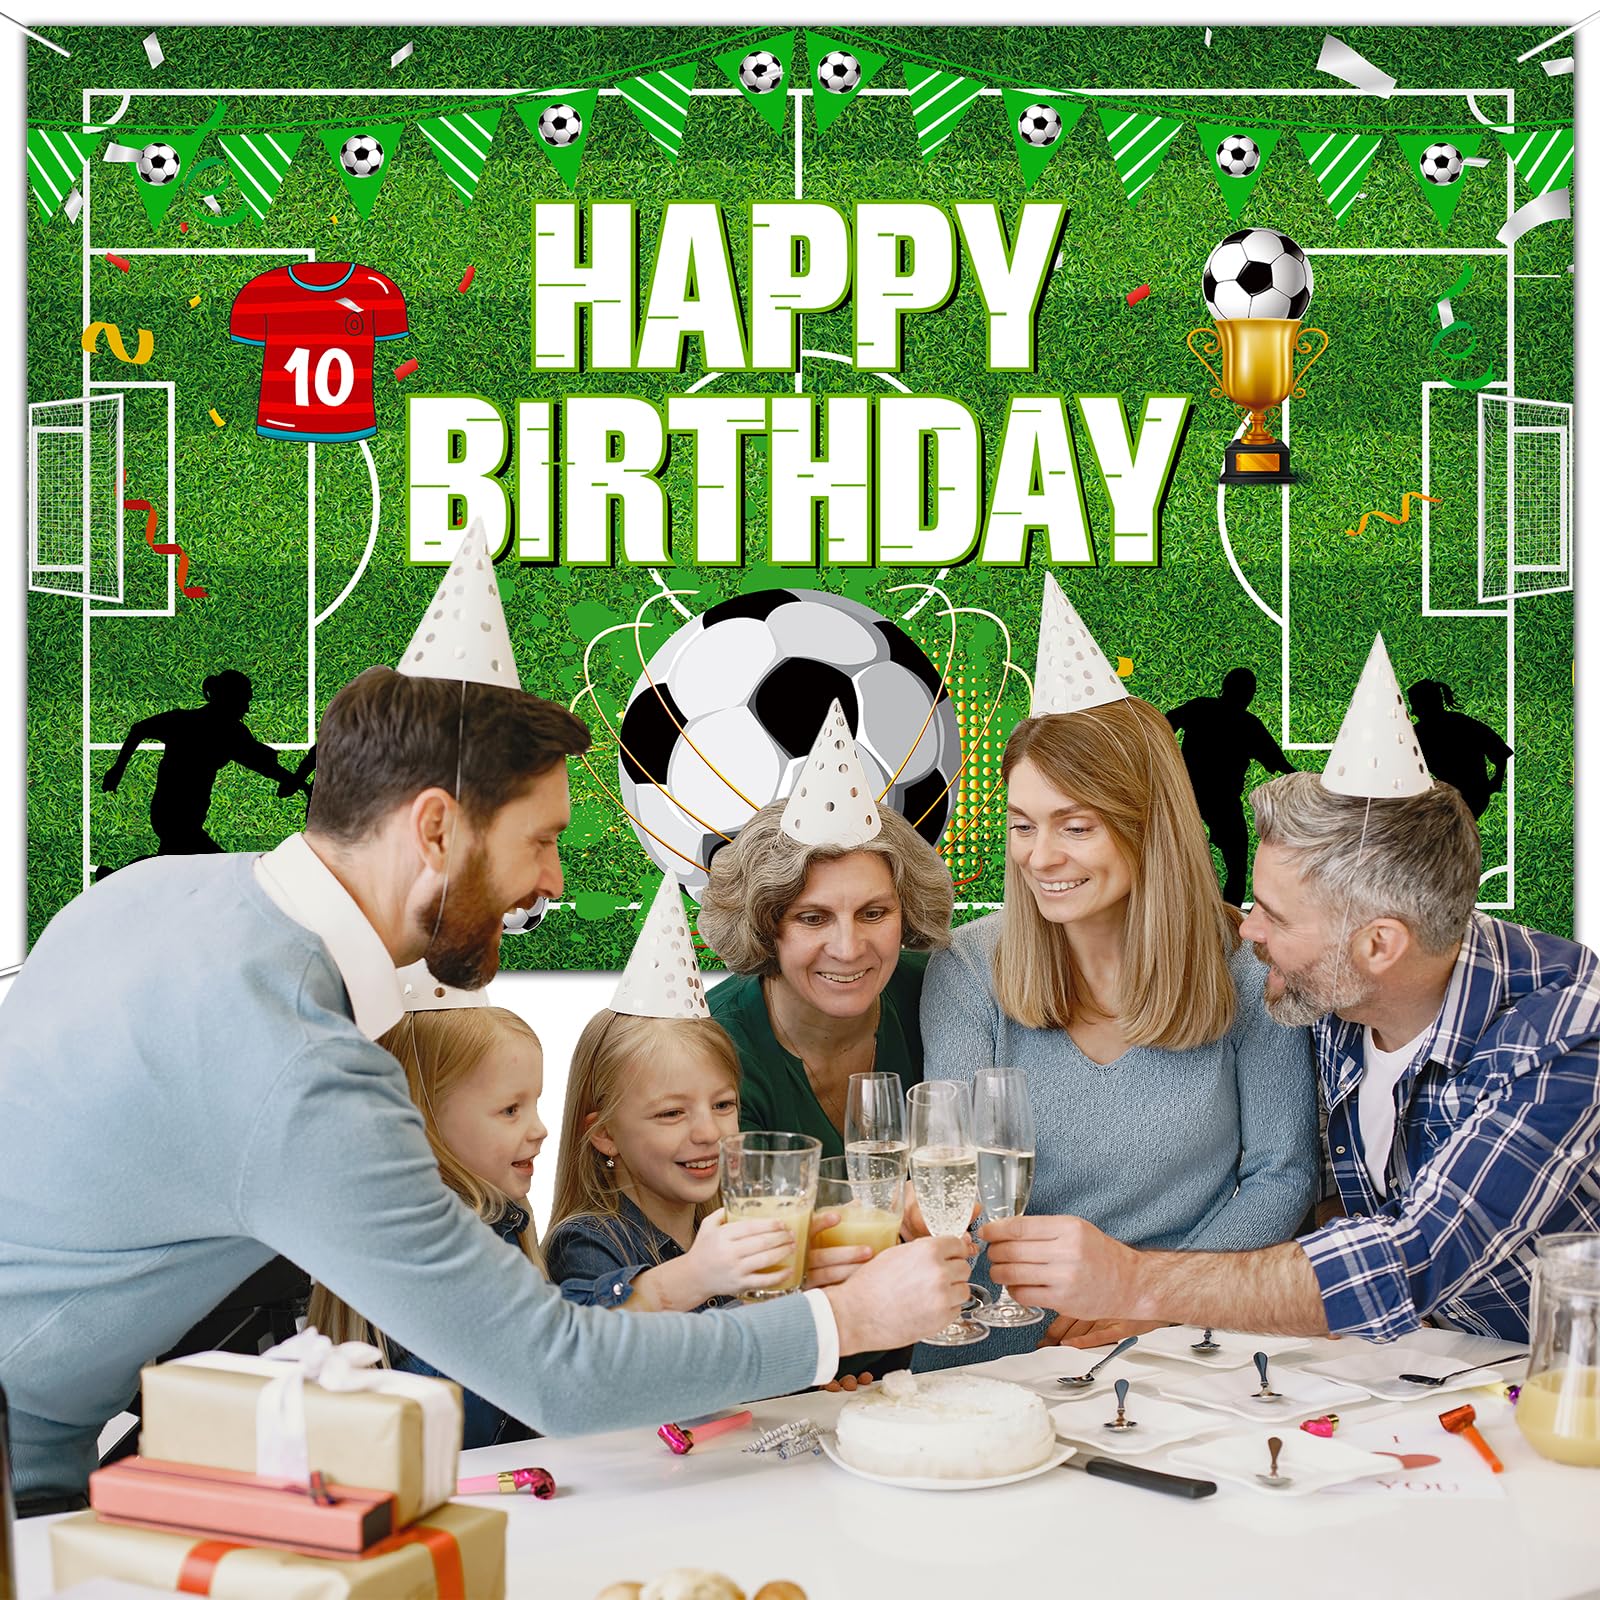 Soccer Party Decorations, 70.8 * 45in Soccer Birthday Banner Backdrop Soccer Theme Background for Soccer Birthday Party Decorations